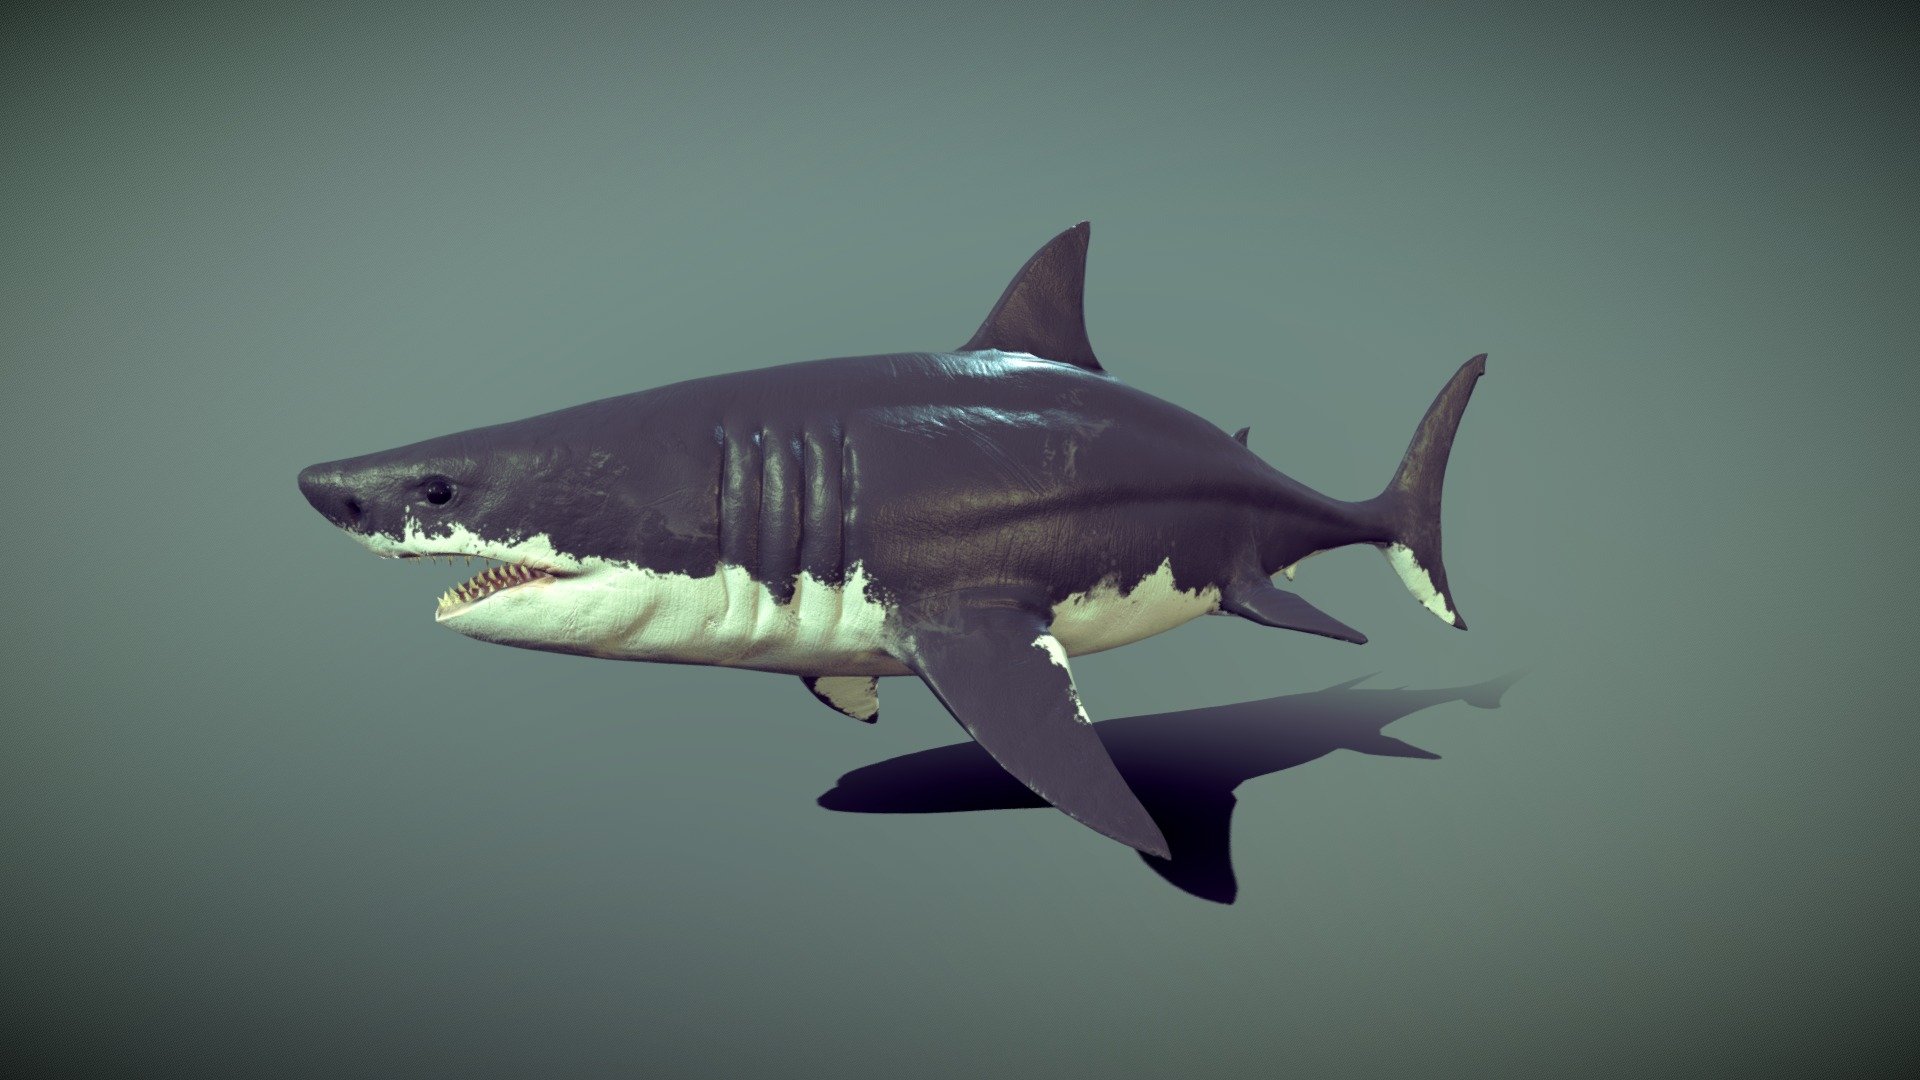 The White Shark 3d was made in blender 2.9 and painted in substance painter , is subdivison ready and have a clean topology , without subdivision it haves 4083 verts and with it, it haves 11302 verts , It is fully rigged with basic bones , it have a total of 3 animations : idle , swim and a speed up one.

Comes with 4k, 2k  textures : diffuse , normal , roughness ,height/displacement and AO maps , baked normal map from a high poly model and place it in the low poly model , uv wrapped it manually .

Eyes and teeth (the teeth is the only overlapping) , all is in one texture .

This is a remodel i made of my frist white shark model , hope you like it.

Comes with a fbx, blend file and textures.

A short animation i did with this model: https://www.youtube.com/watch?v=FiQ-RSBRsVE&amp;t=4s - White Shark - Buy Royalty Free 3D model by GoldenZtuff (@dhjwdwd) 3d model